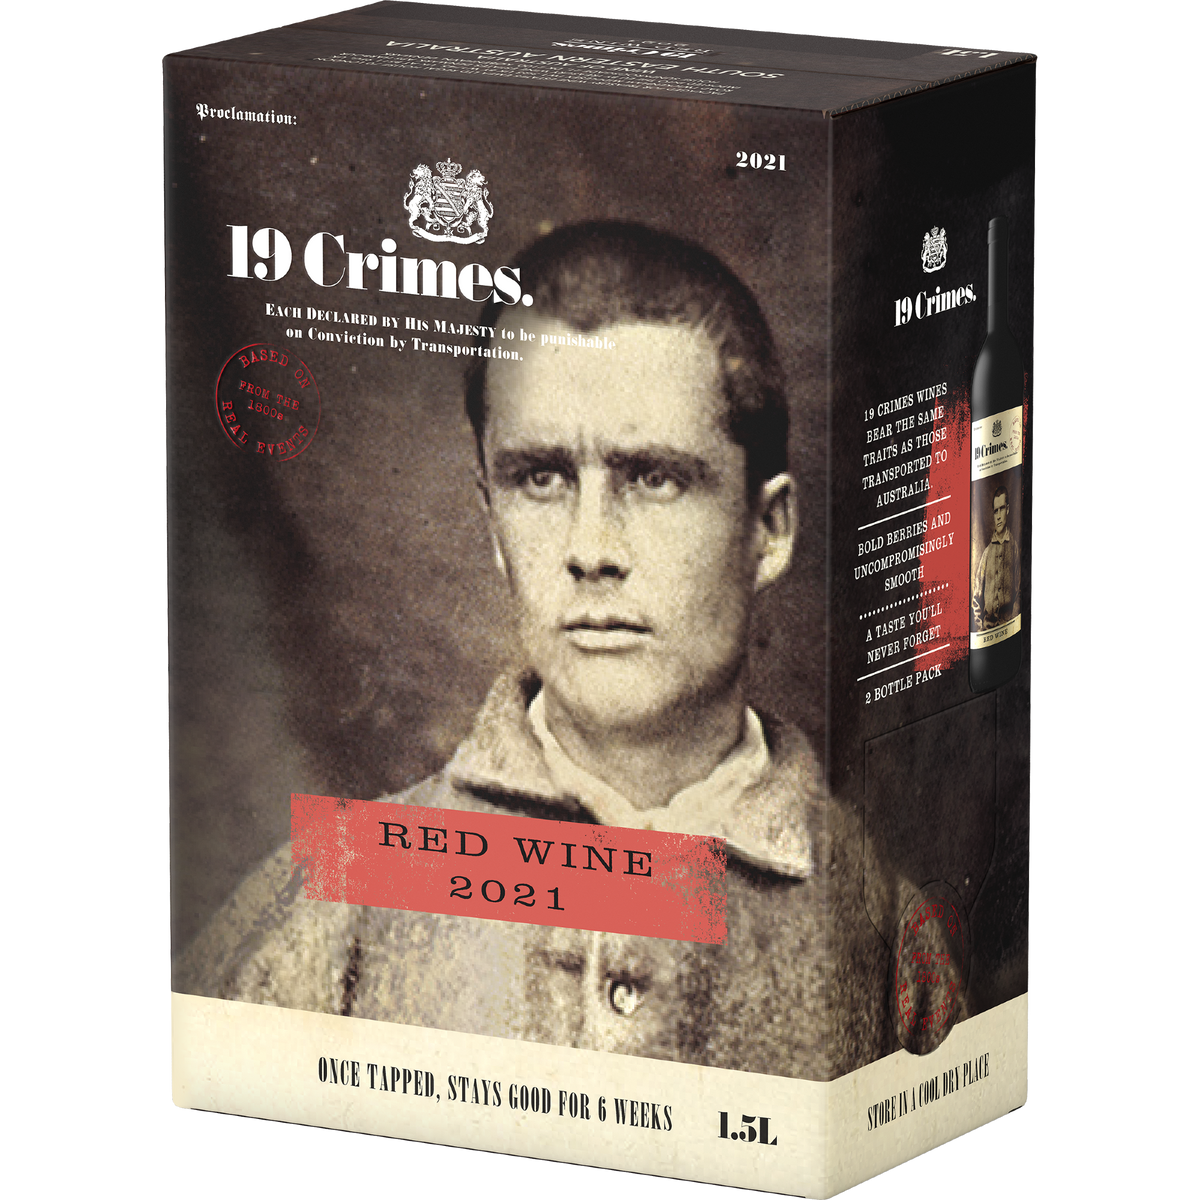 19 Crimes Red Wine Bag in Box